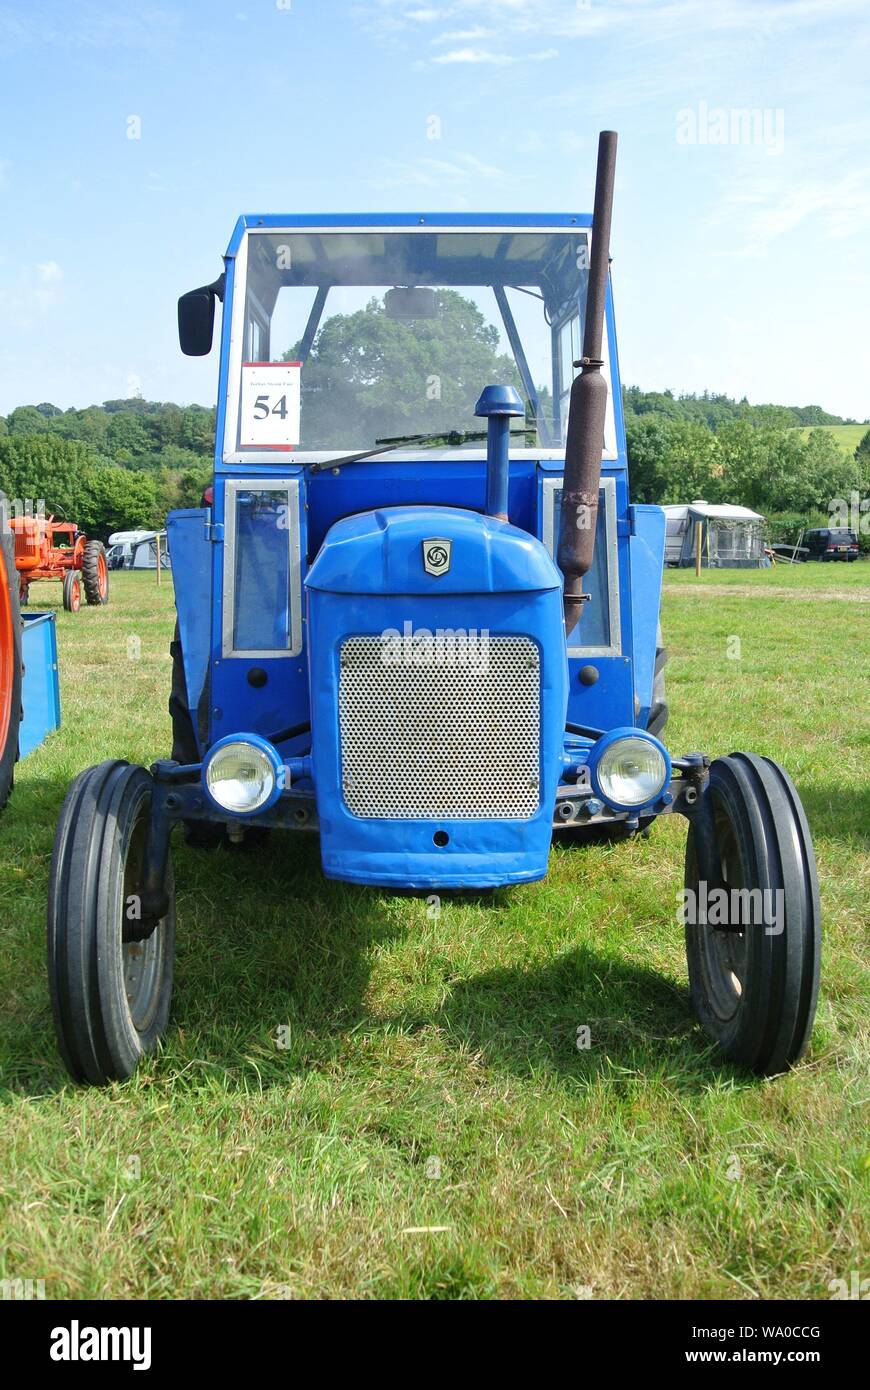 A 1973 Leyland 154 tractor parked on display at the Torbay Steam Fair, Devon, England, UK. Stock Photo